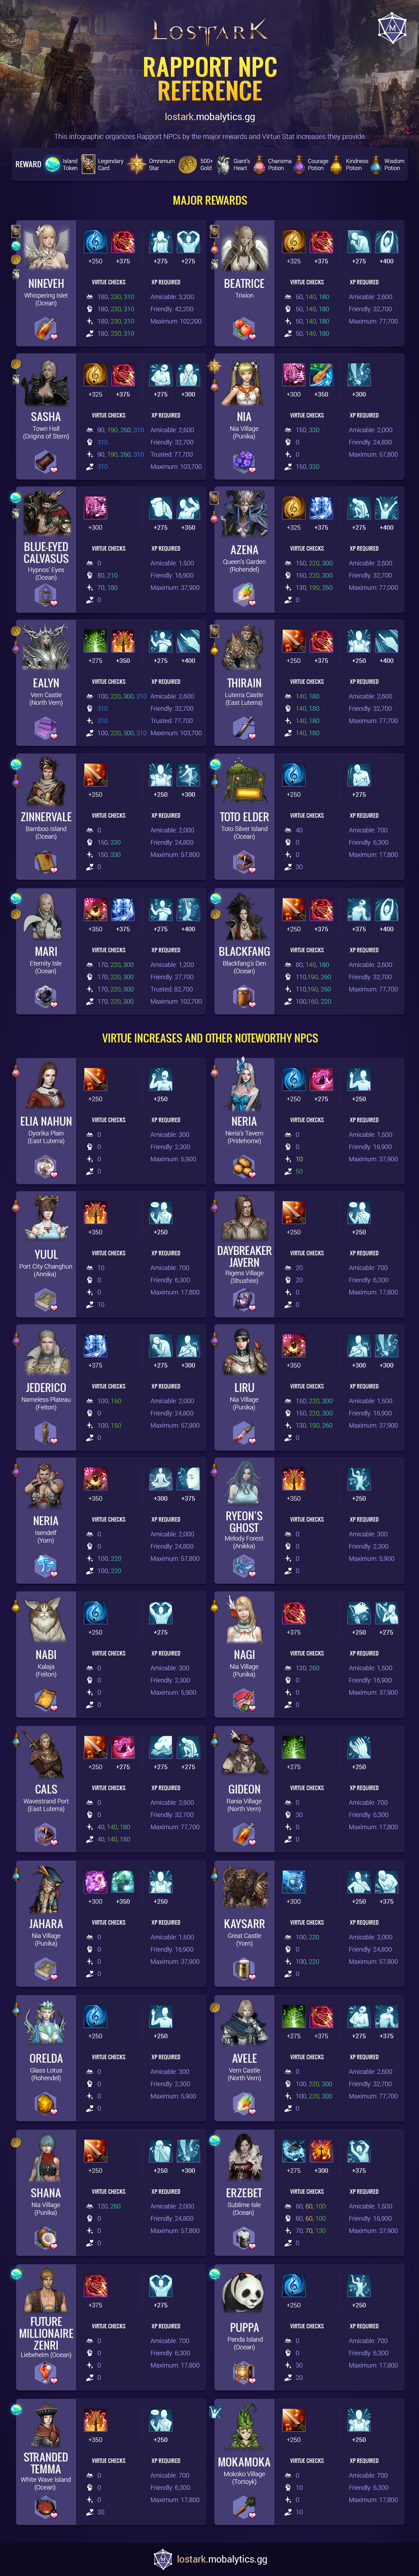 Lost Ark Rapport Infographic (High Priority NPCs and Rewards)